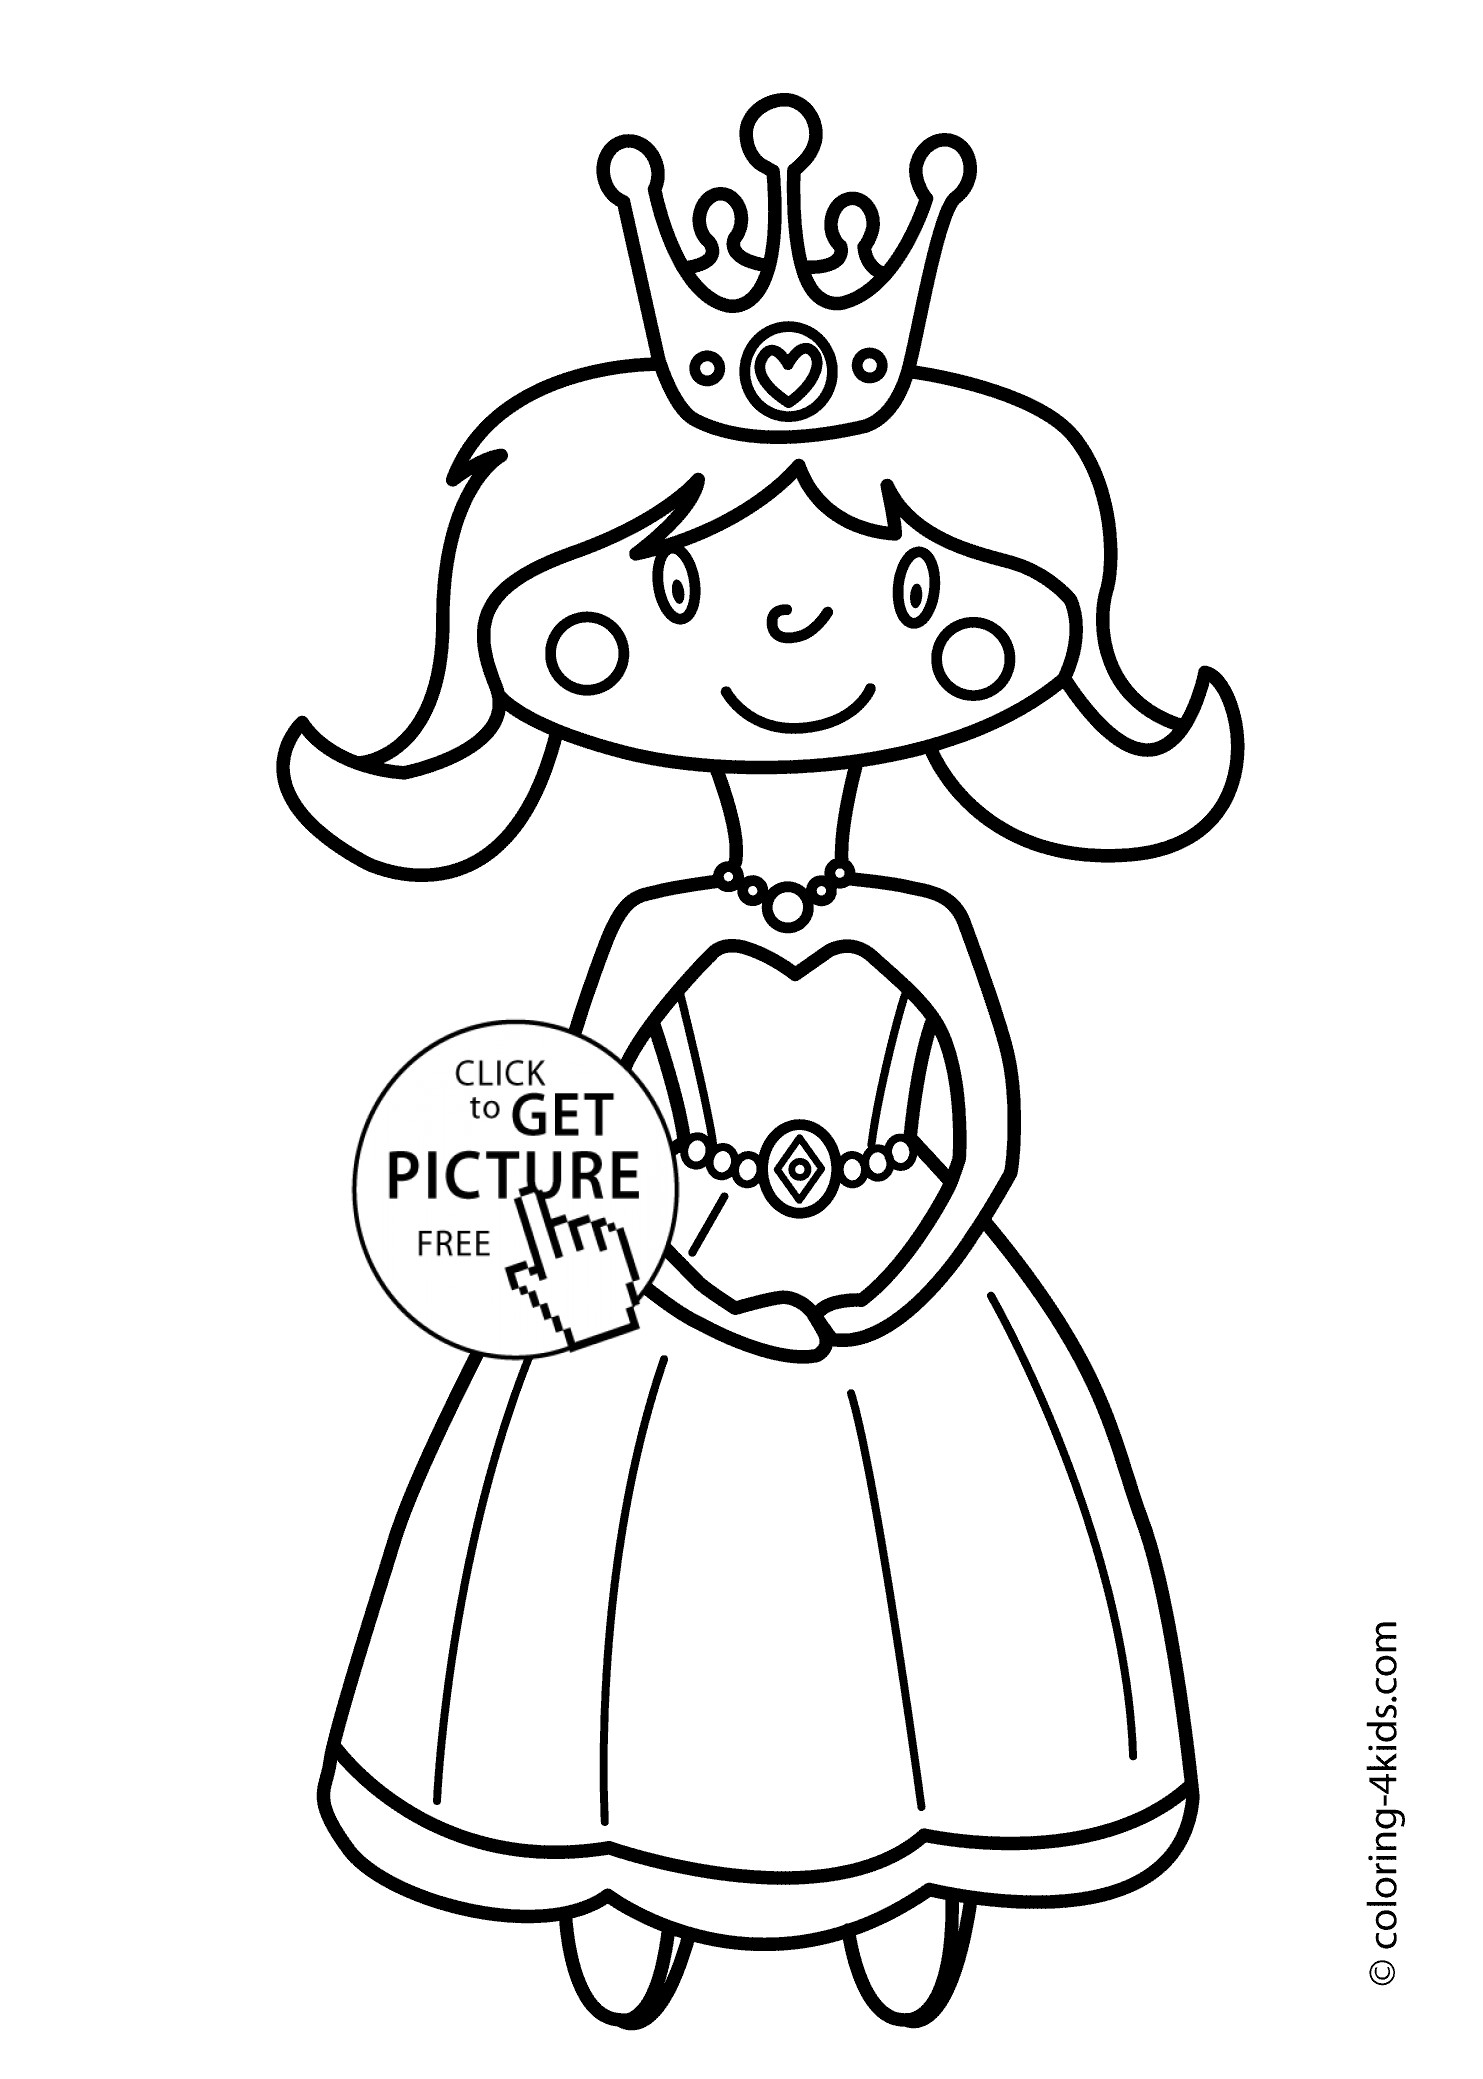 Printable Coloring Sheets For Girls
 Cute Princesse Coloring pages for girls printable